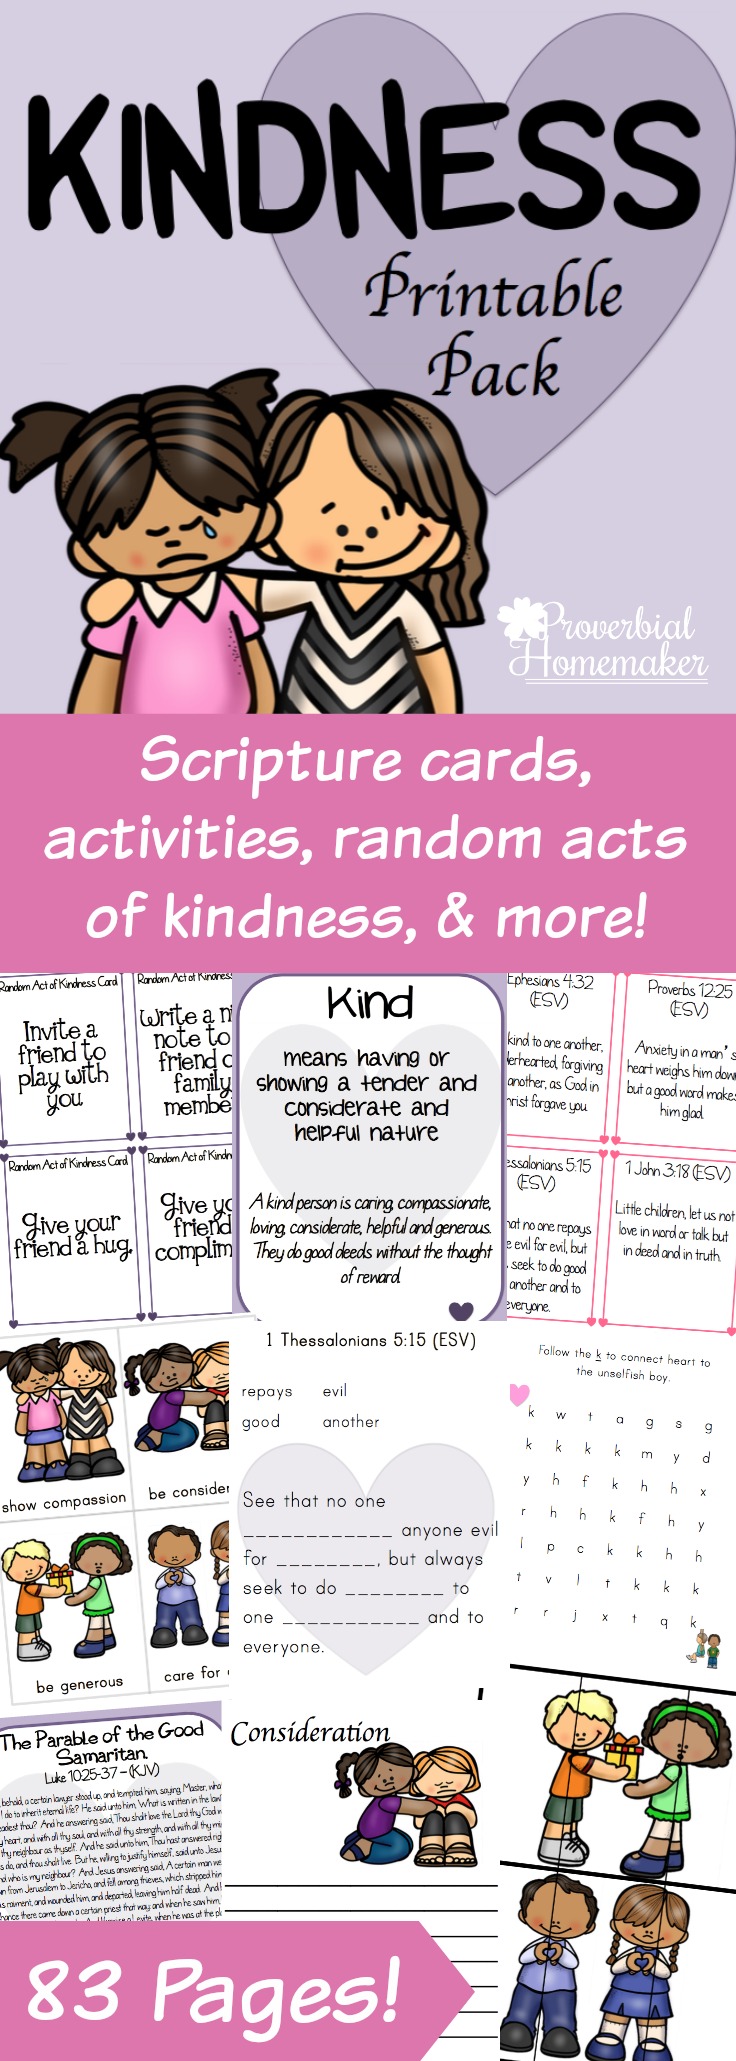 Scripture Cards, Activities, Random Acts of Kindness, & More!